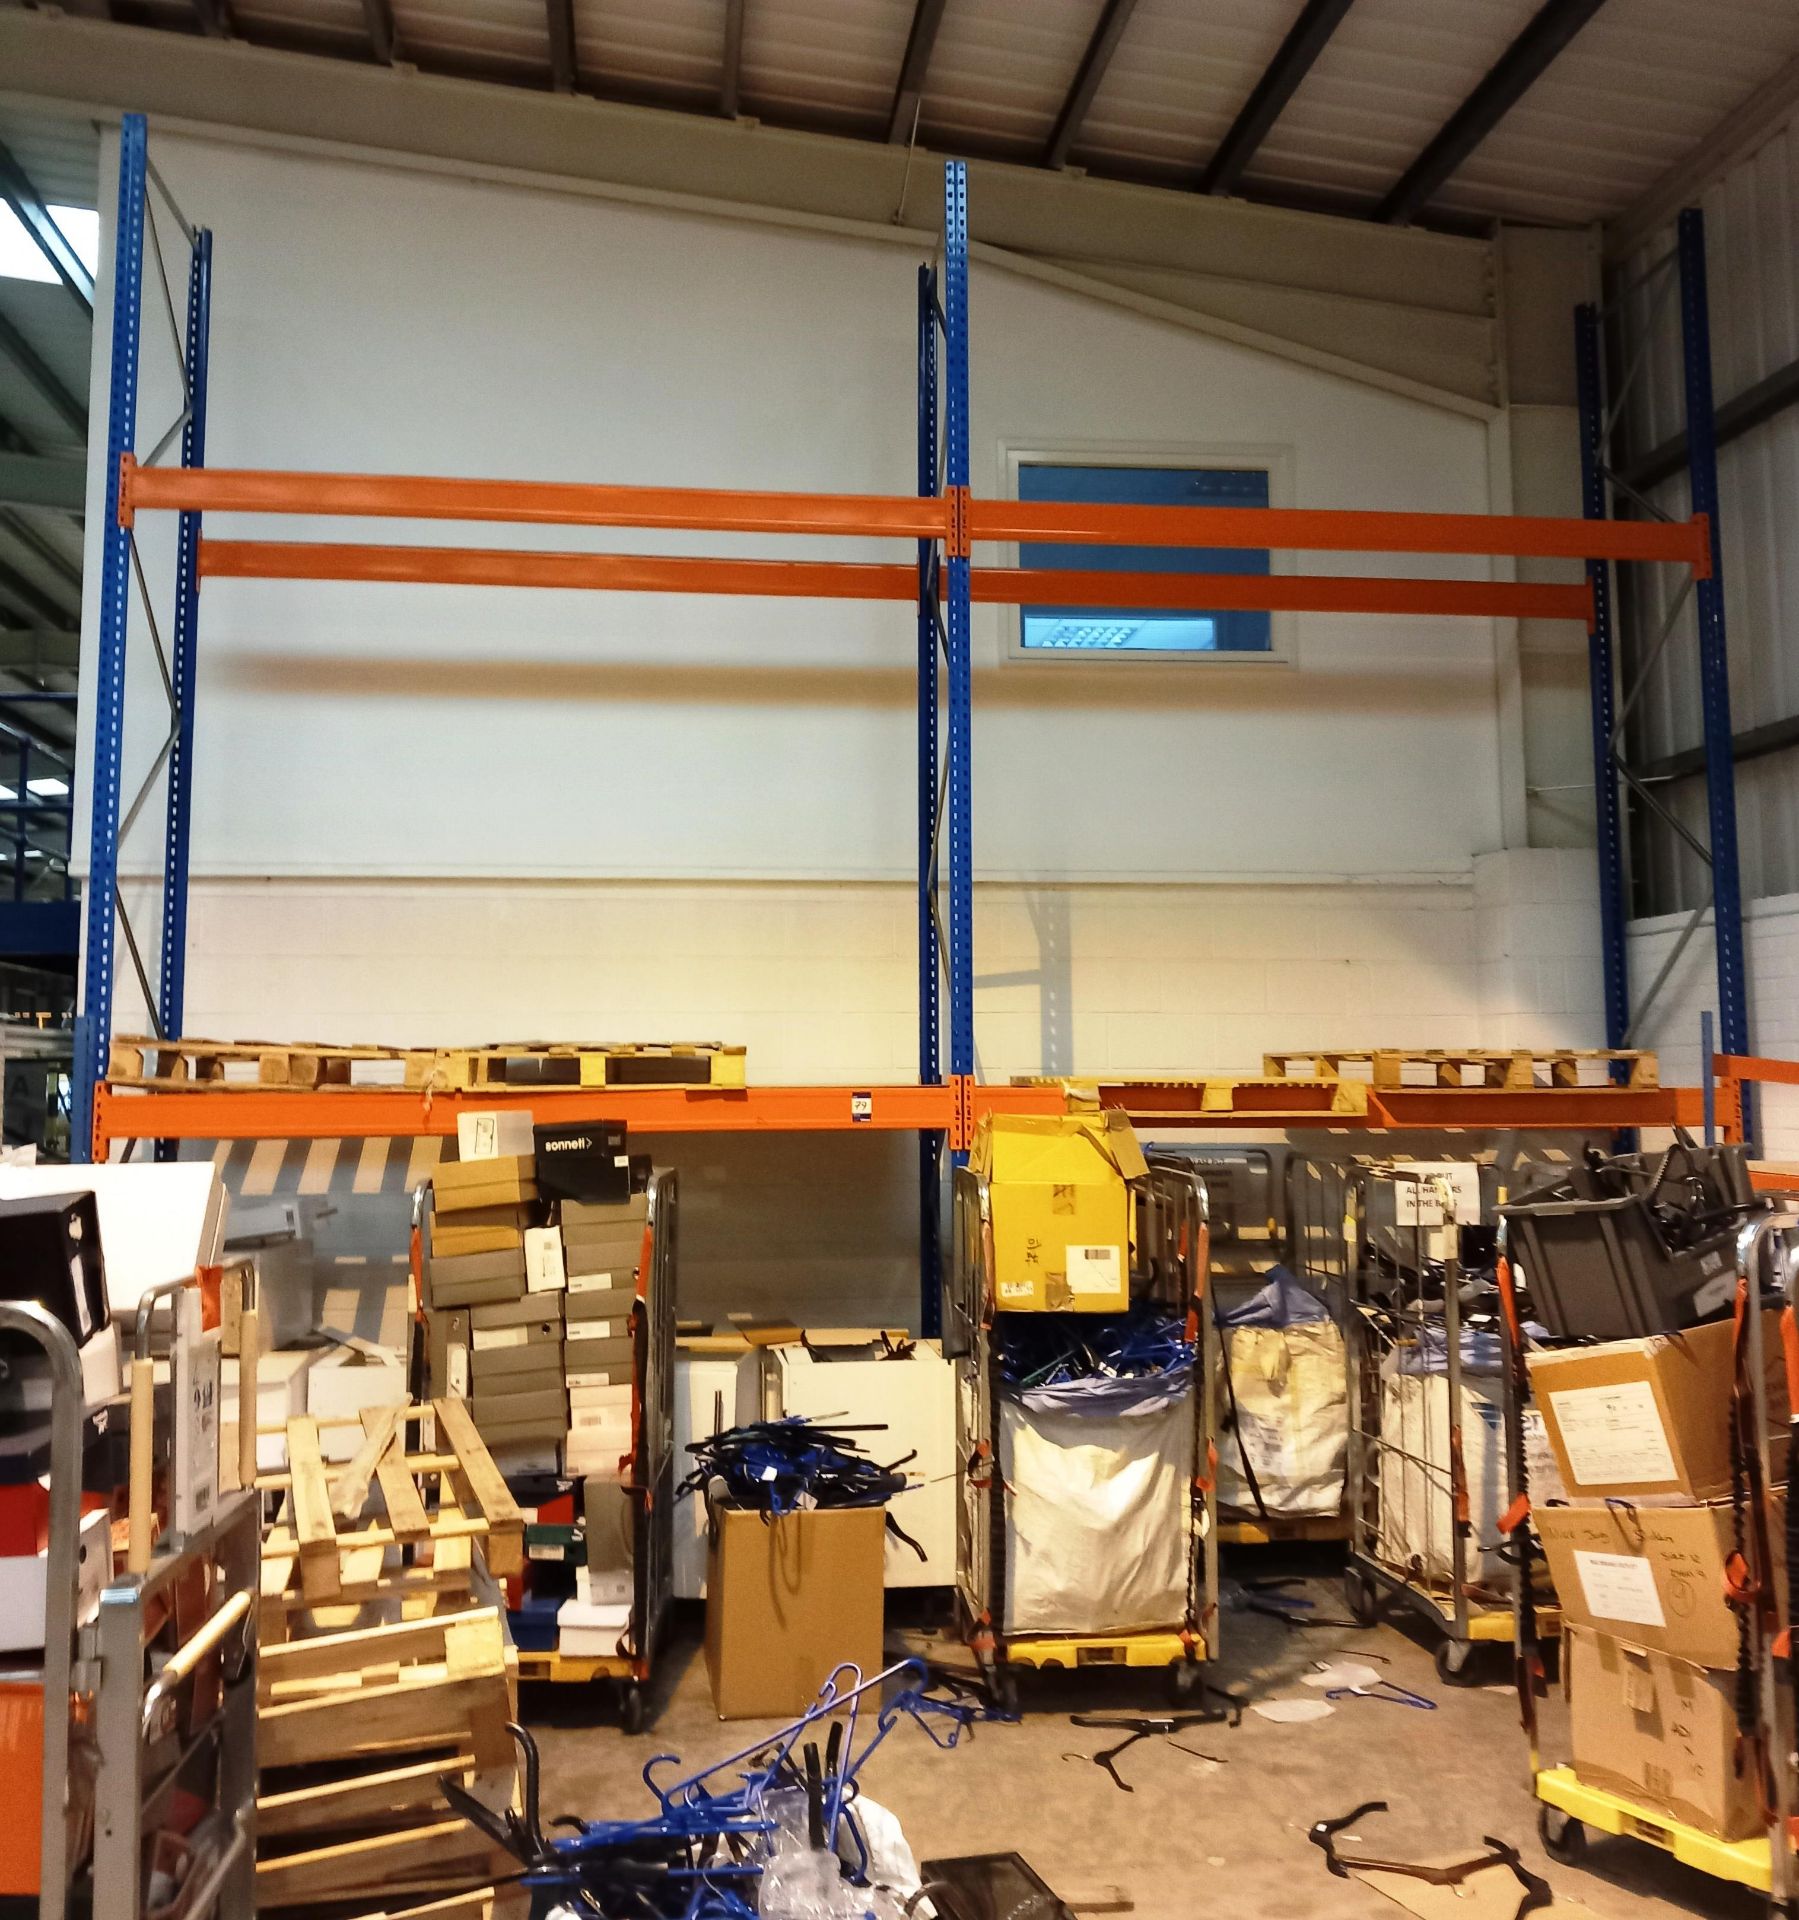 2 bays of boltless racking to include 3 uprights (16ft) and 4 cross beams (9ft)